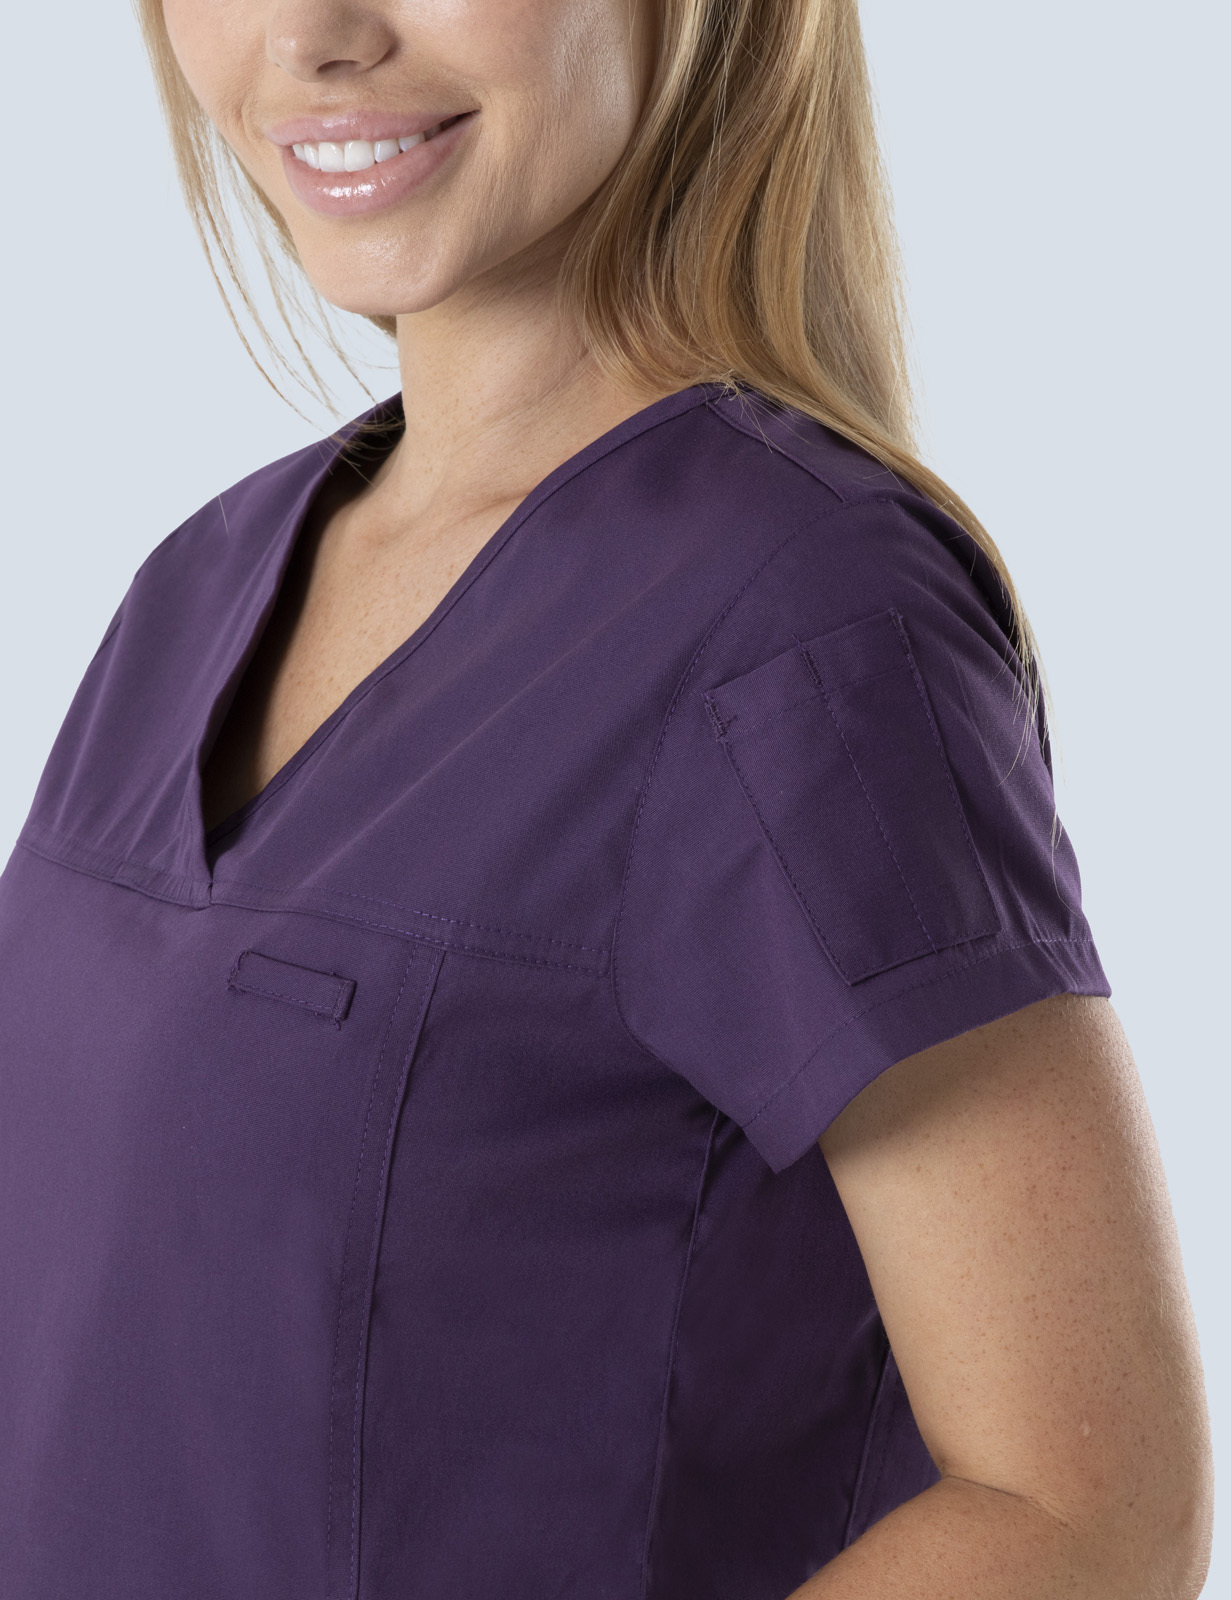 Women's Fit Solid Scrub Top - Aubergine - Large - 1